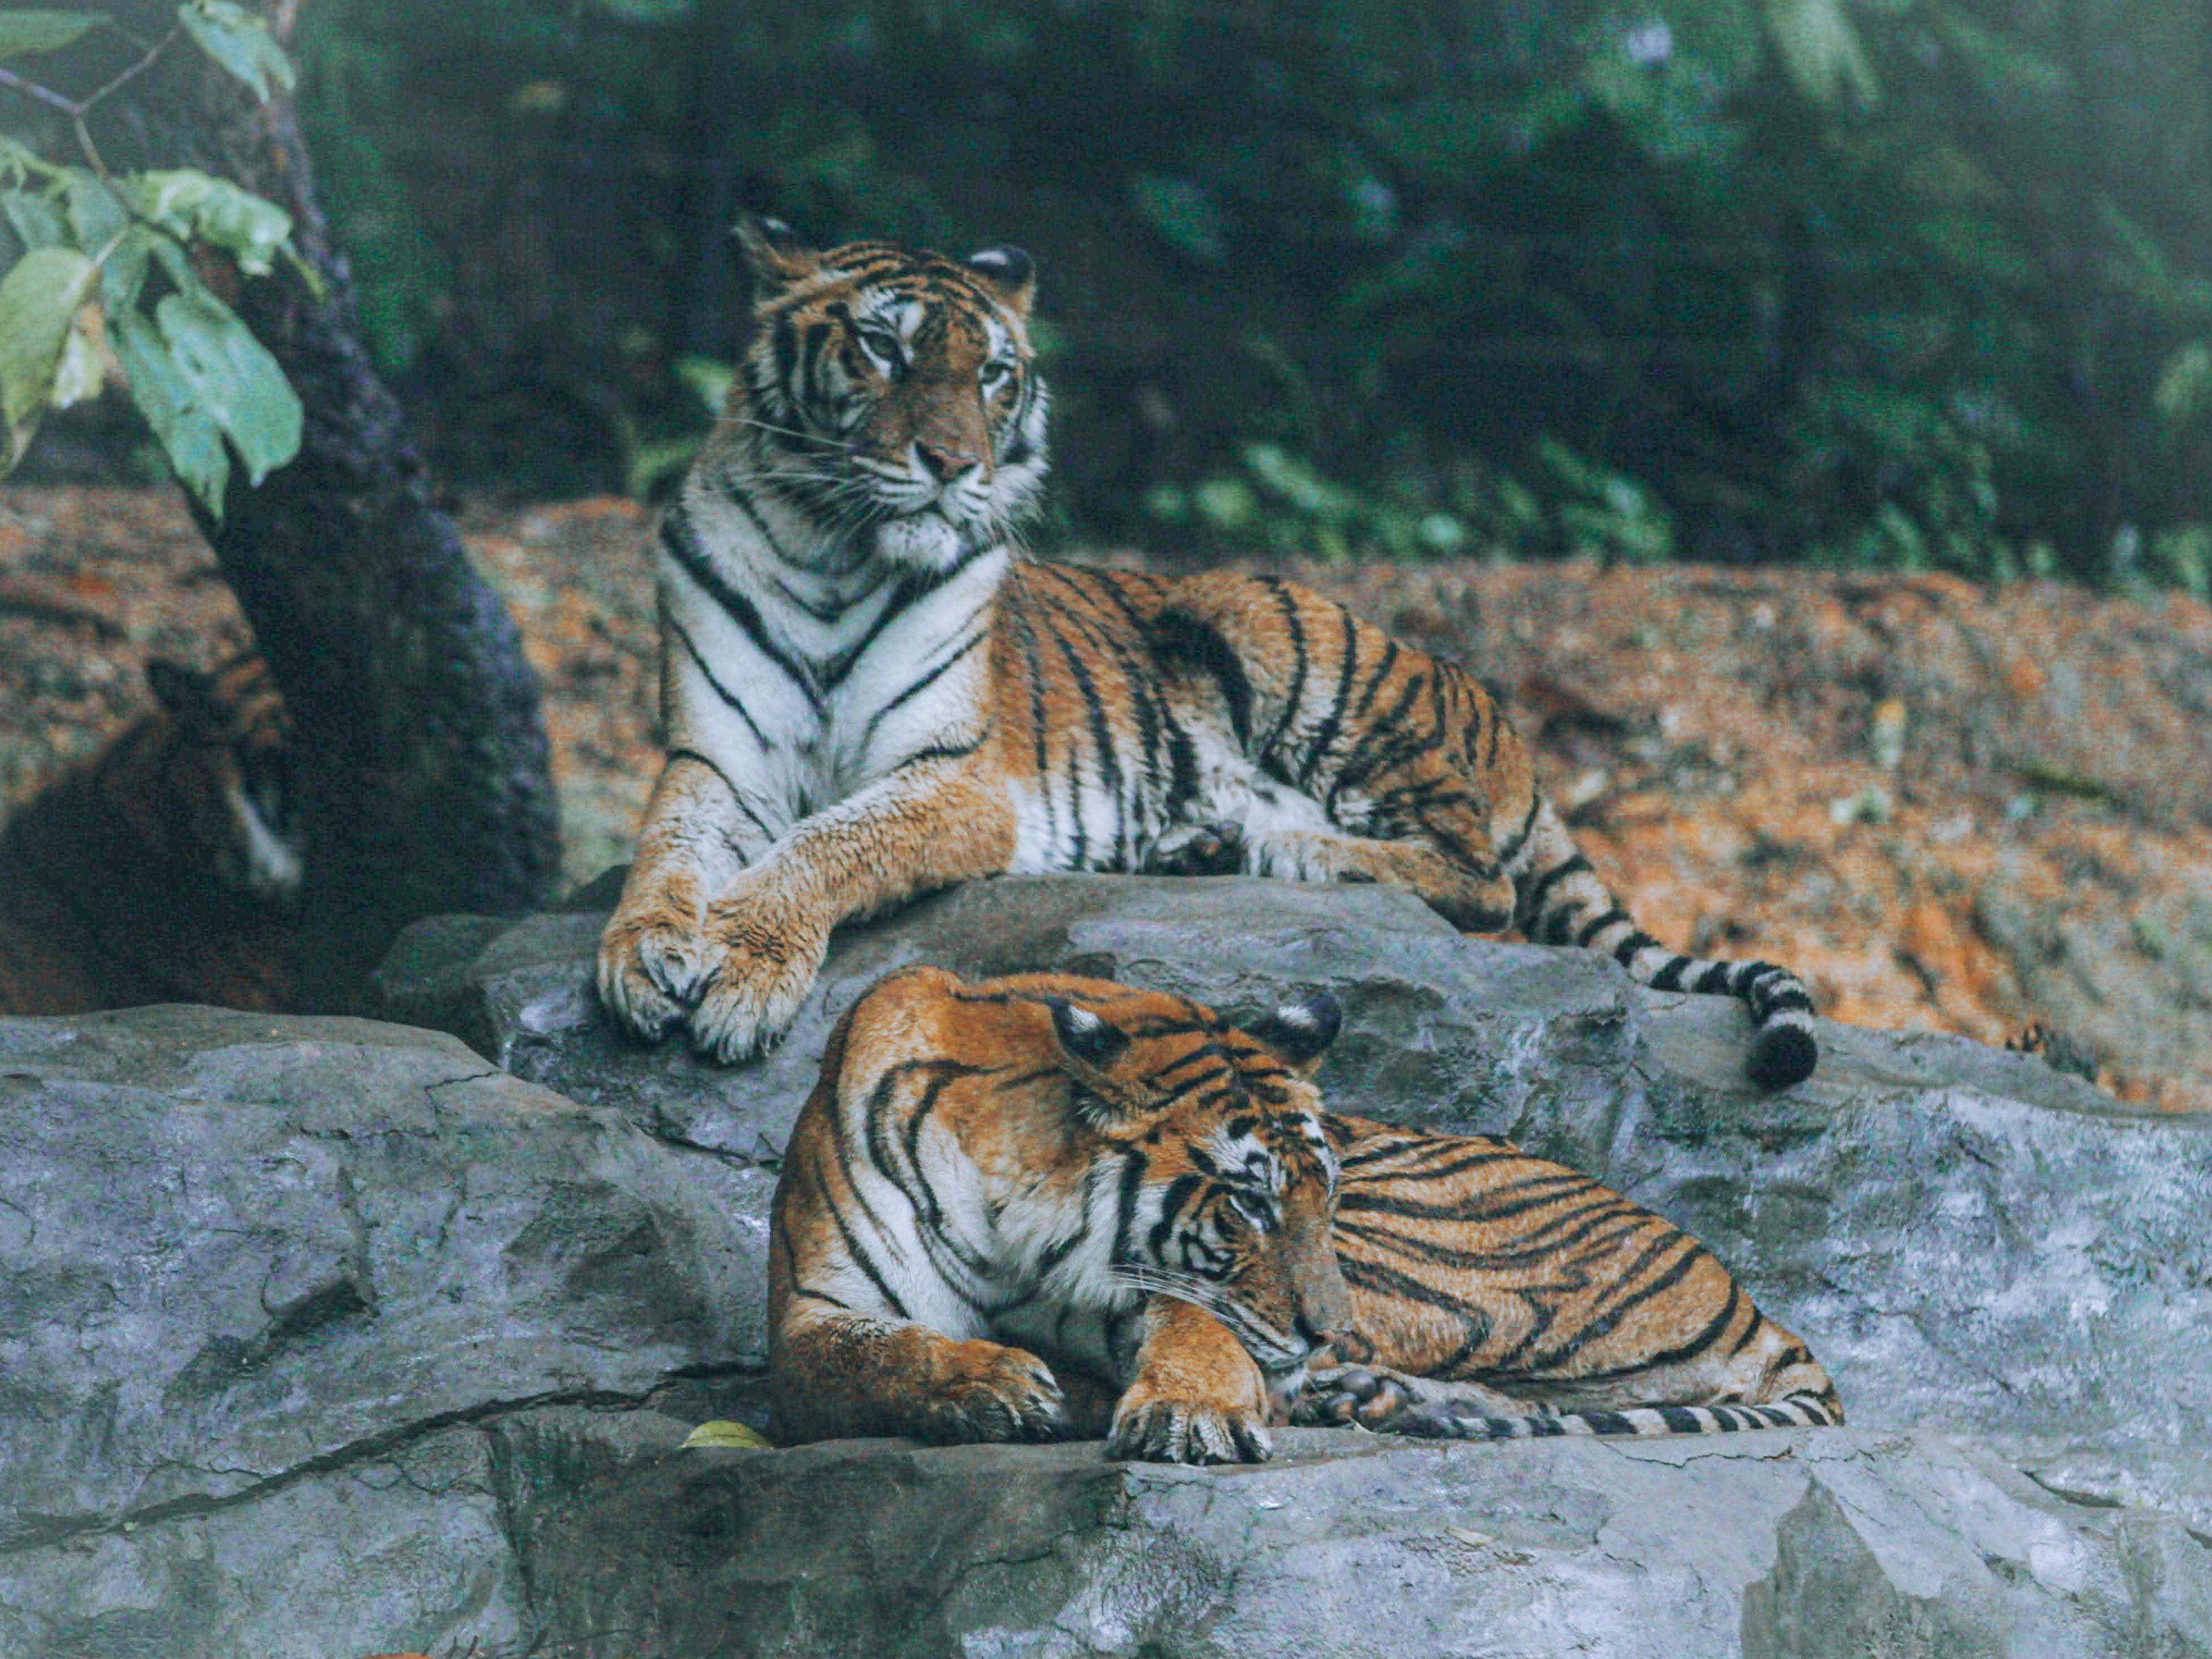 tigers in the forest